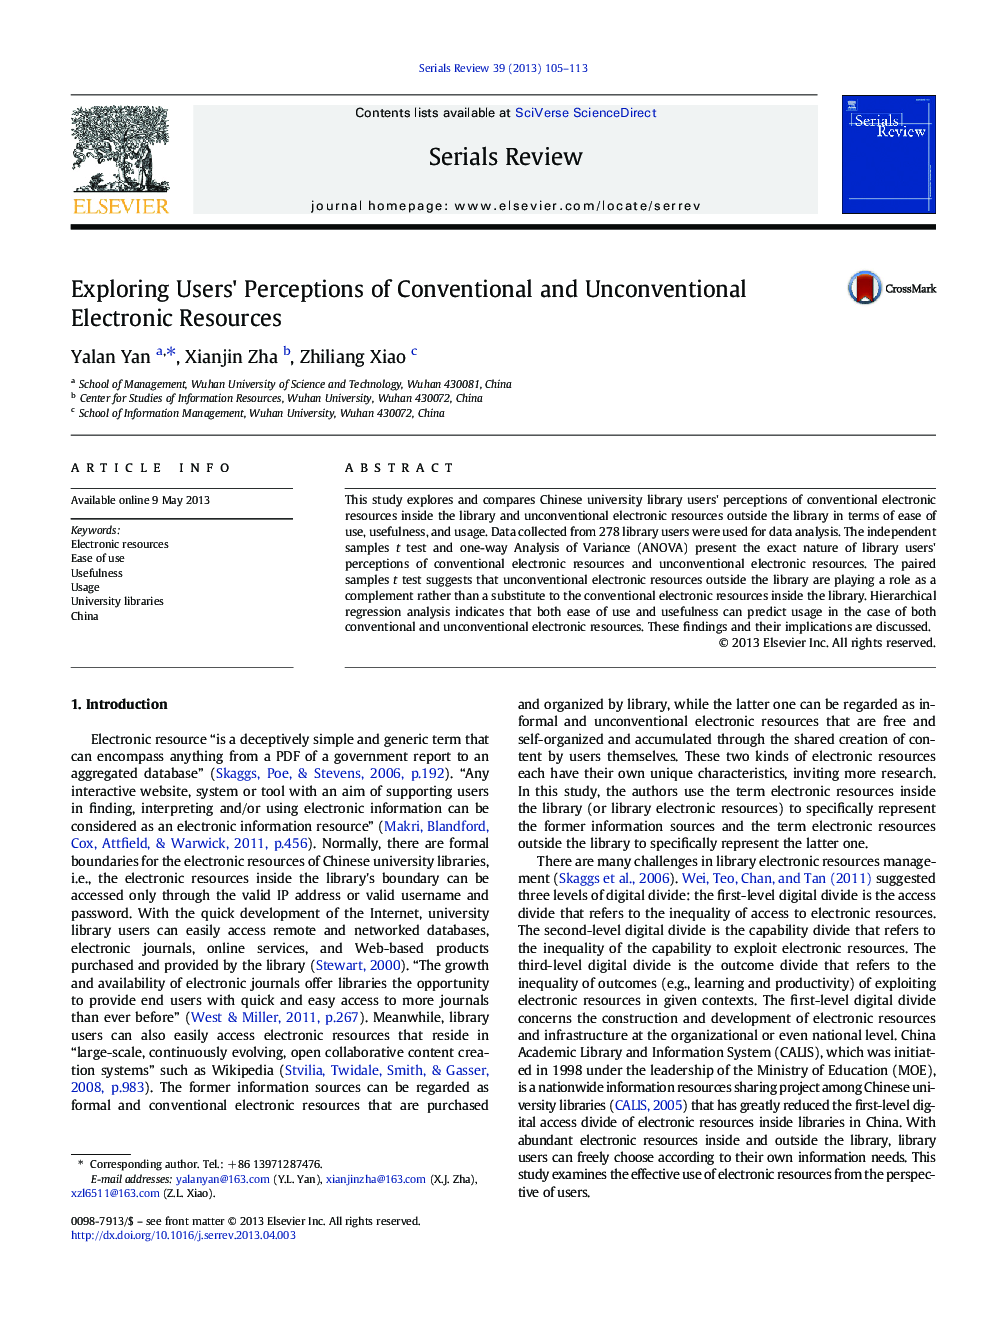 Exploring Users' Perceptions of Conventional and Unconventional Electronic Resources